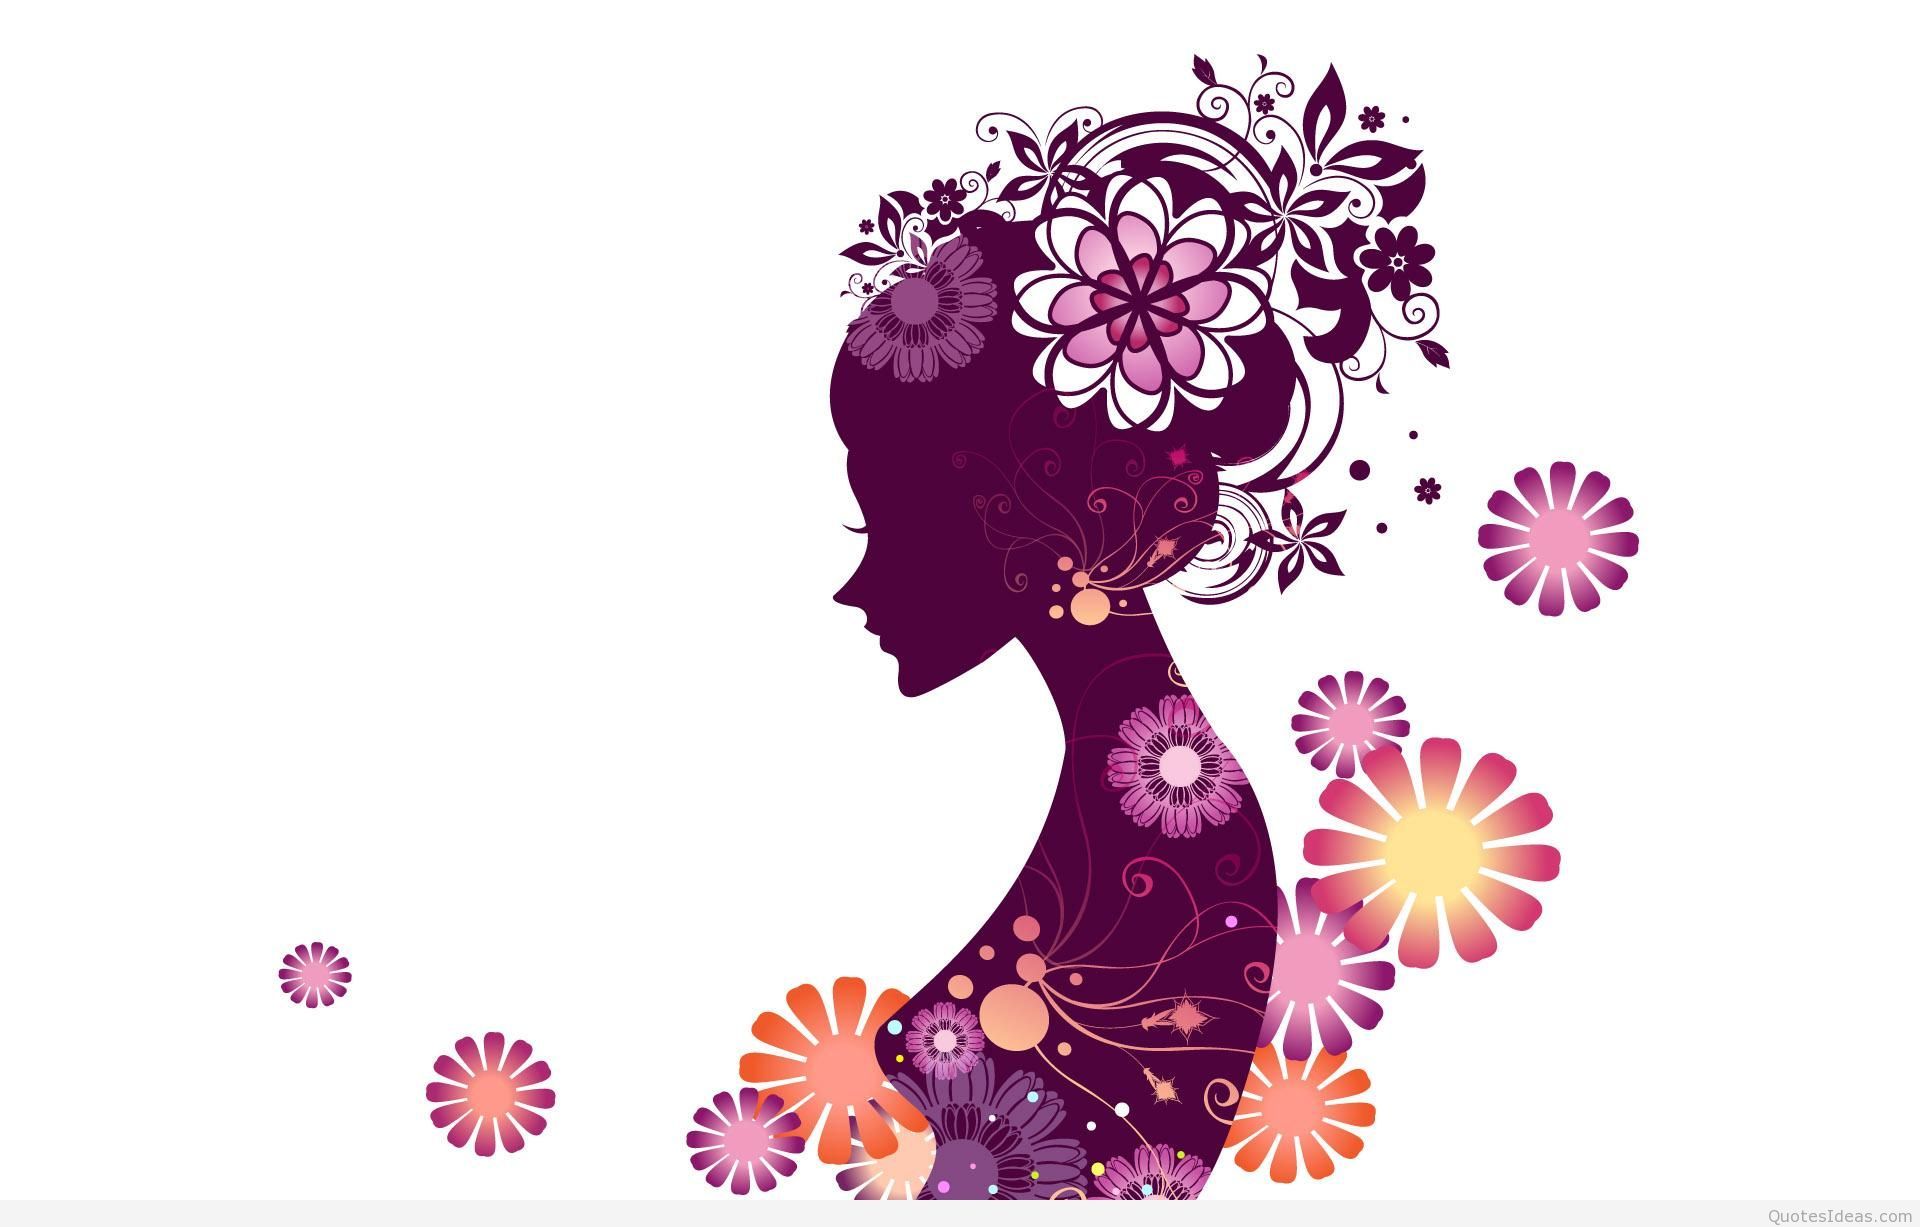 Happy women's day 8 march quotes image and wallpaper